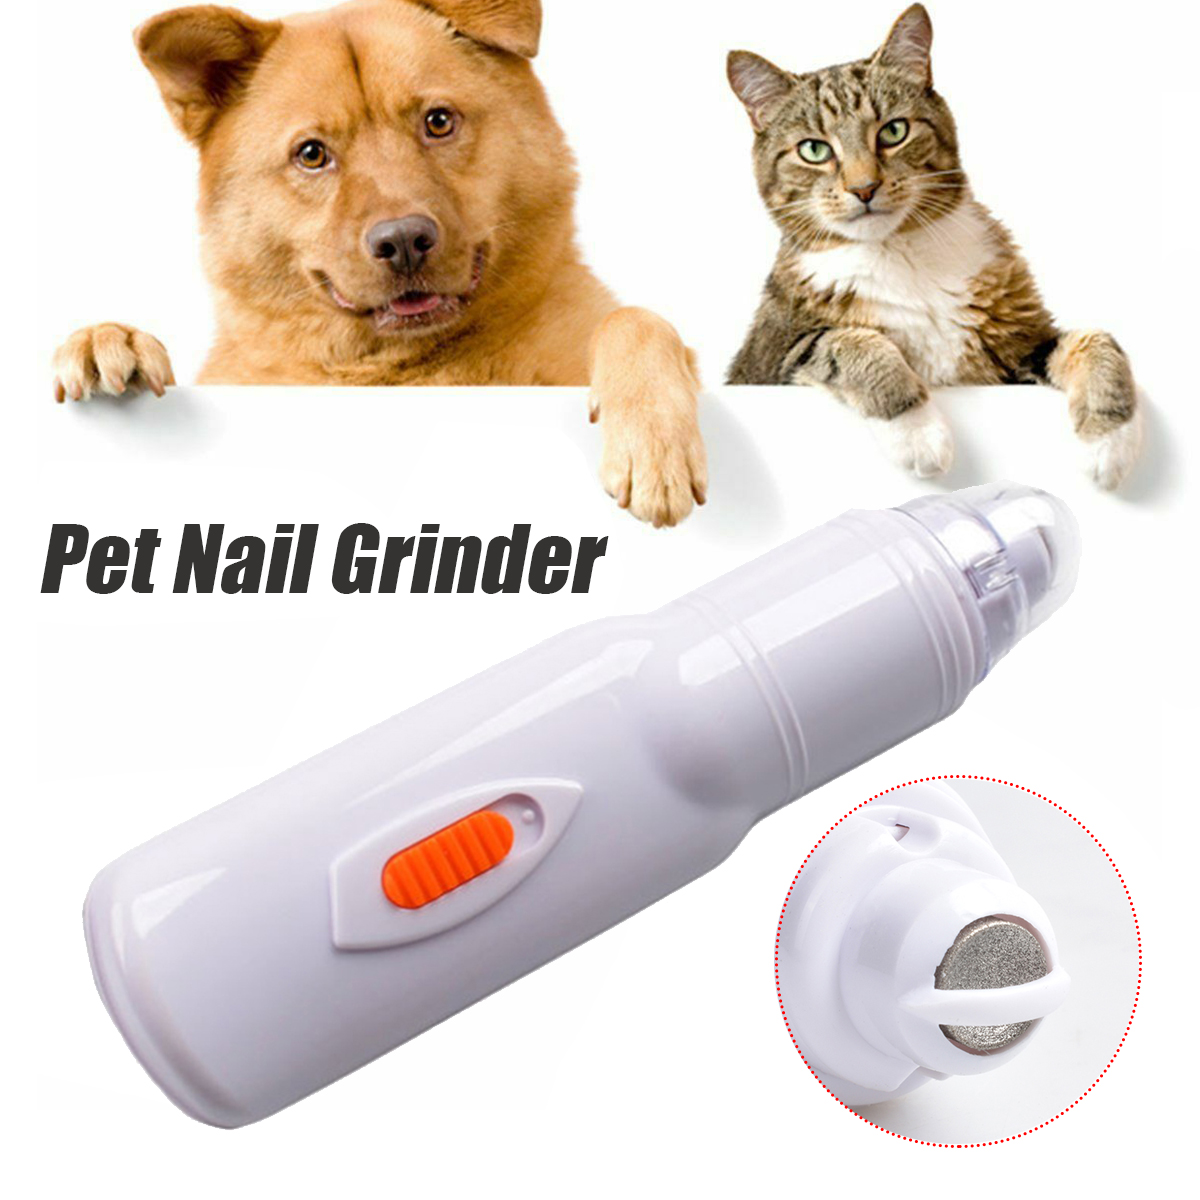 Pet-Dog-Cat-Nail-Electric-Grinder-Clipper-Claw-Grooming-Trimmer-Sharpener-Tools-1659839-3